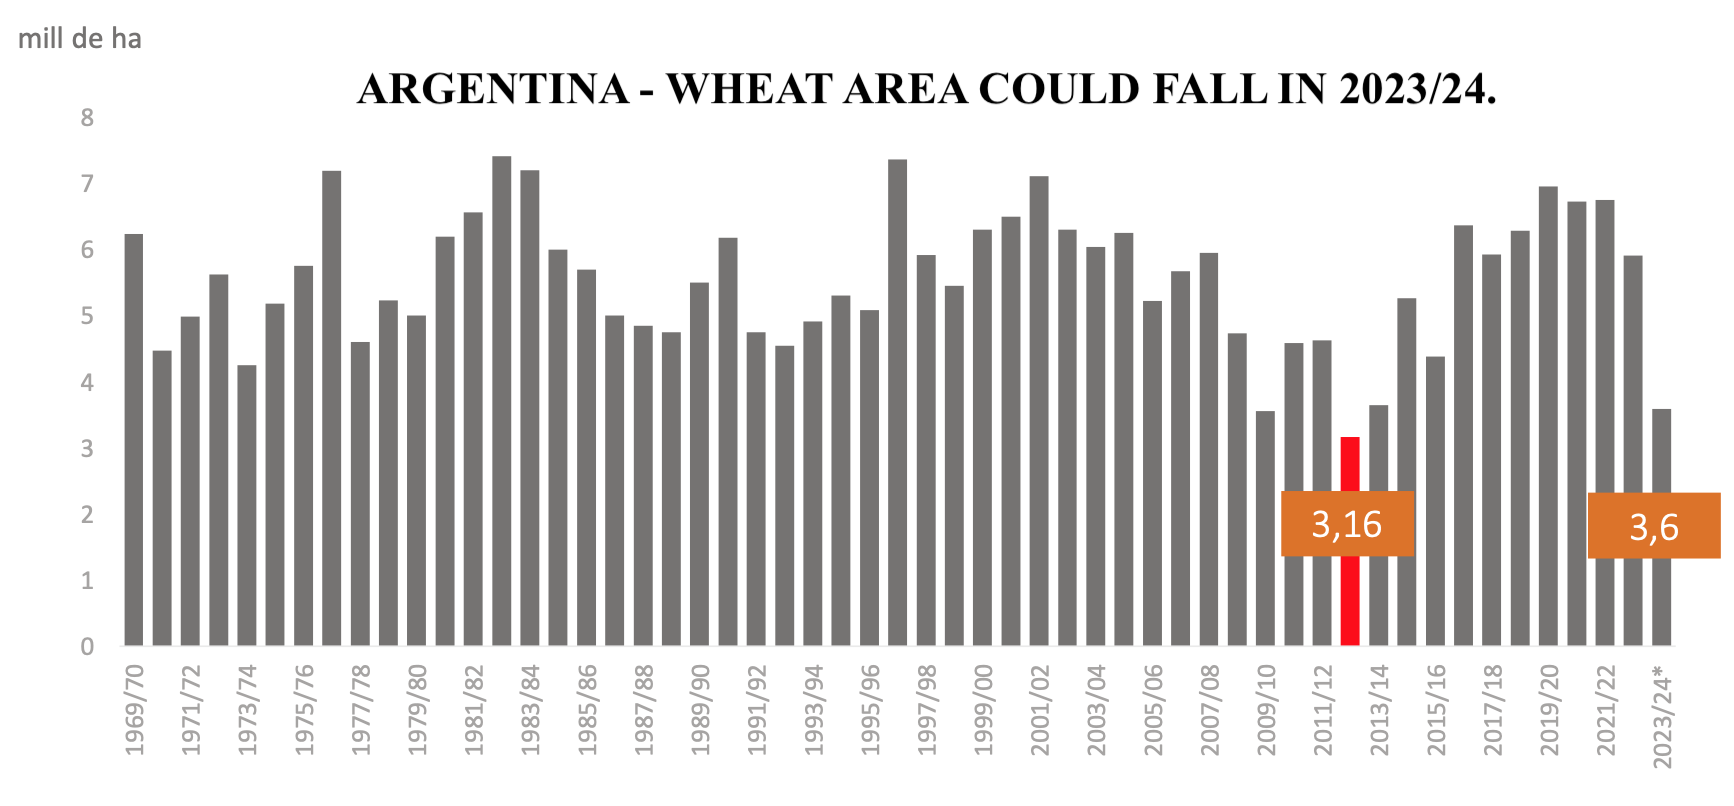 Will the Argentinian 🇦🇷 drought also affect their 2023 wheat potential?